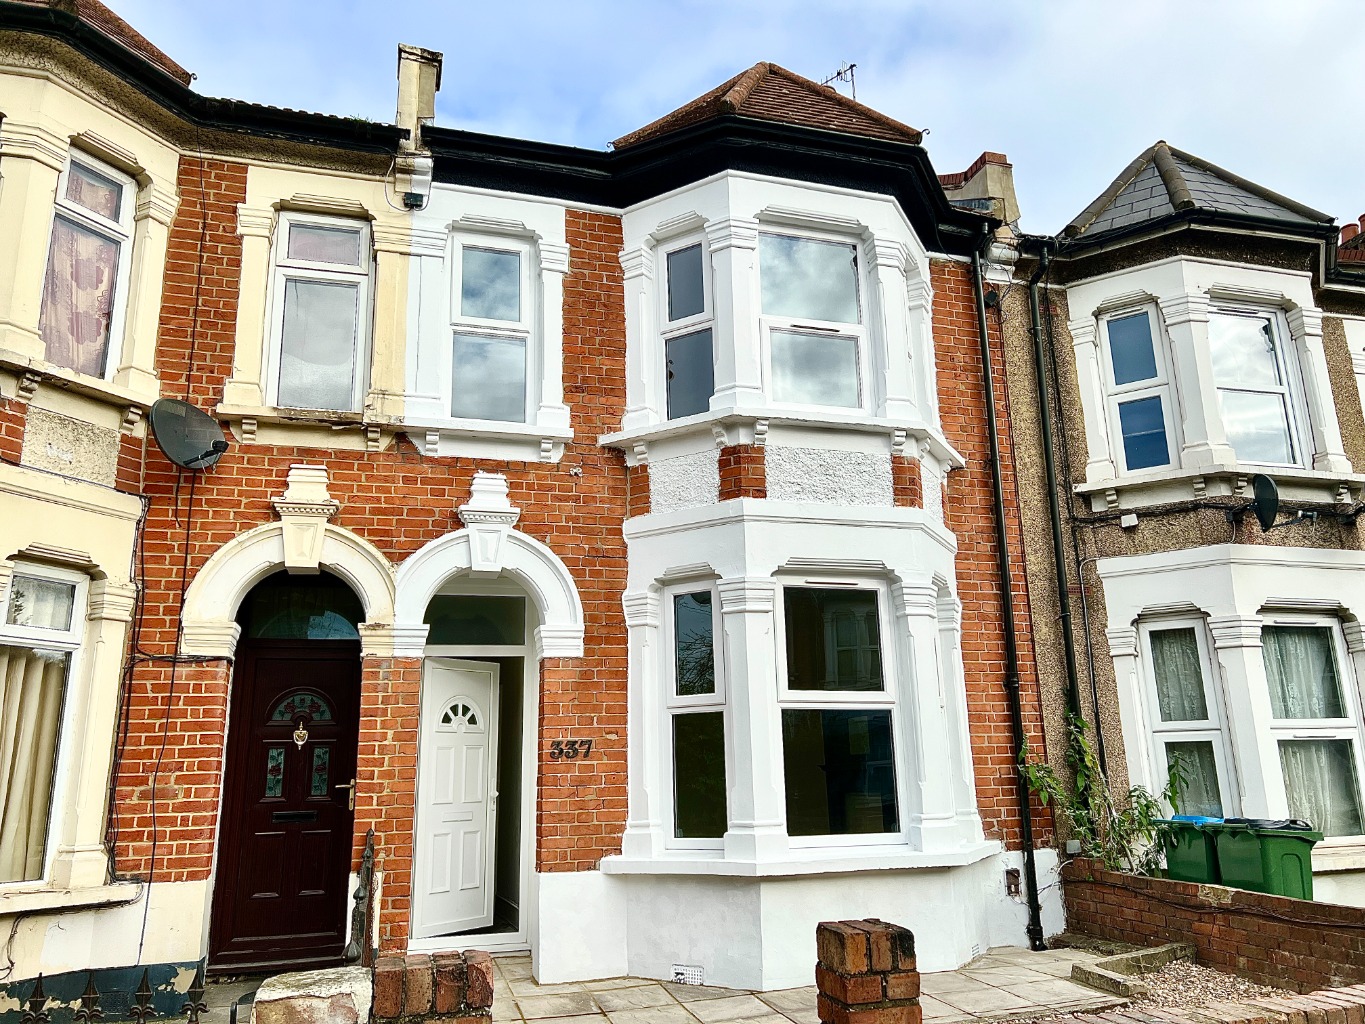 Beaumont Gibbs are offering this newly refurbished four bedroomed Victorian terrace house to the market for sale. The property is situated at the Bostall Hill end of Plumstead High Street and is approximately one mile from Abbey Wood mainline station and forthcoming Crossrail link.